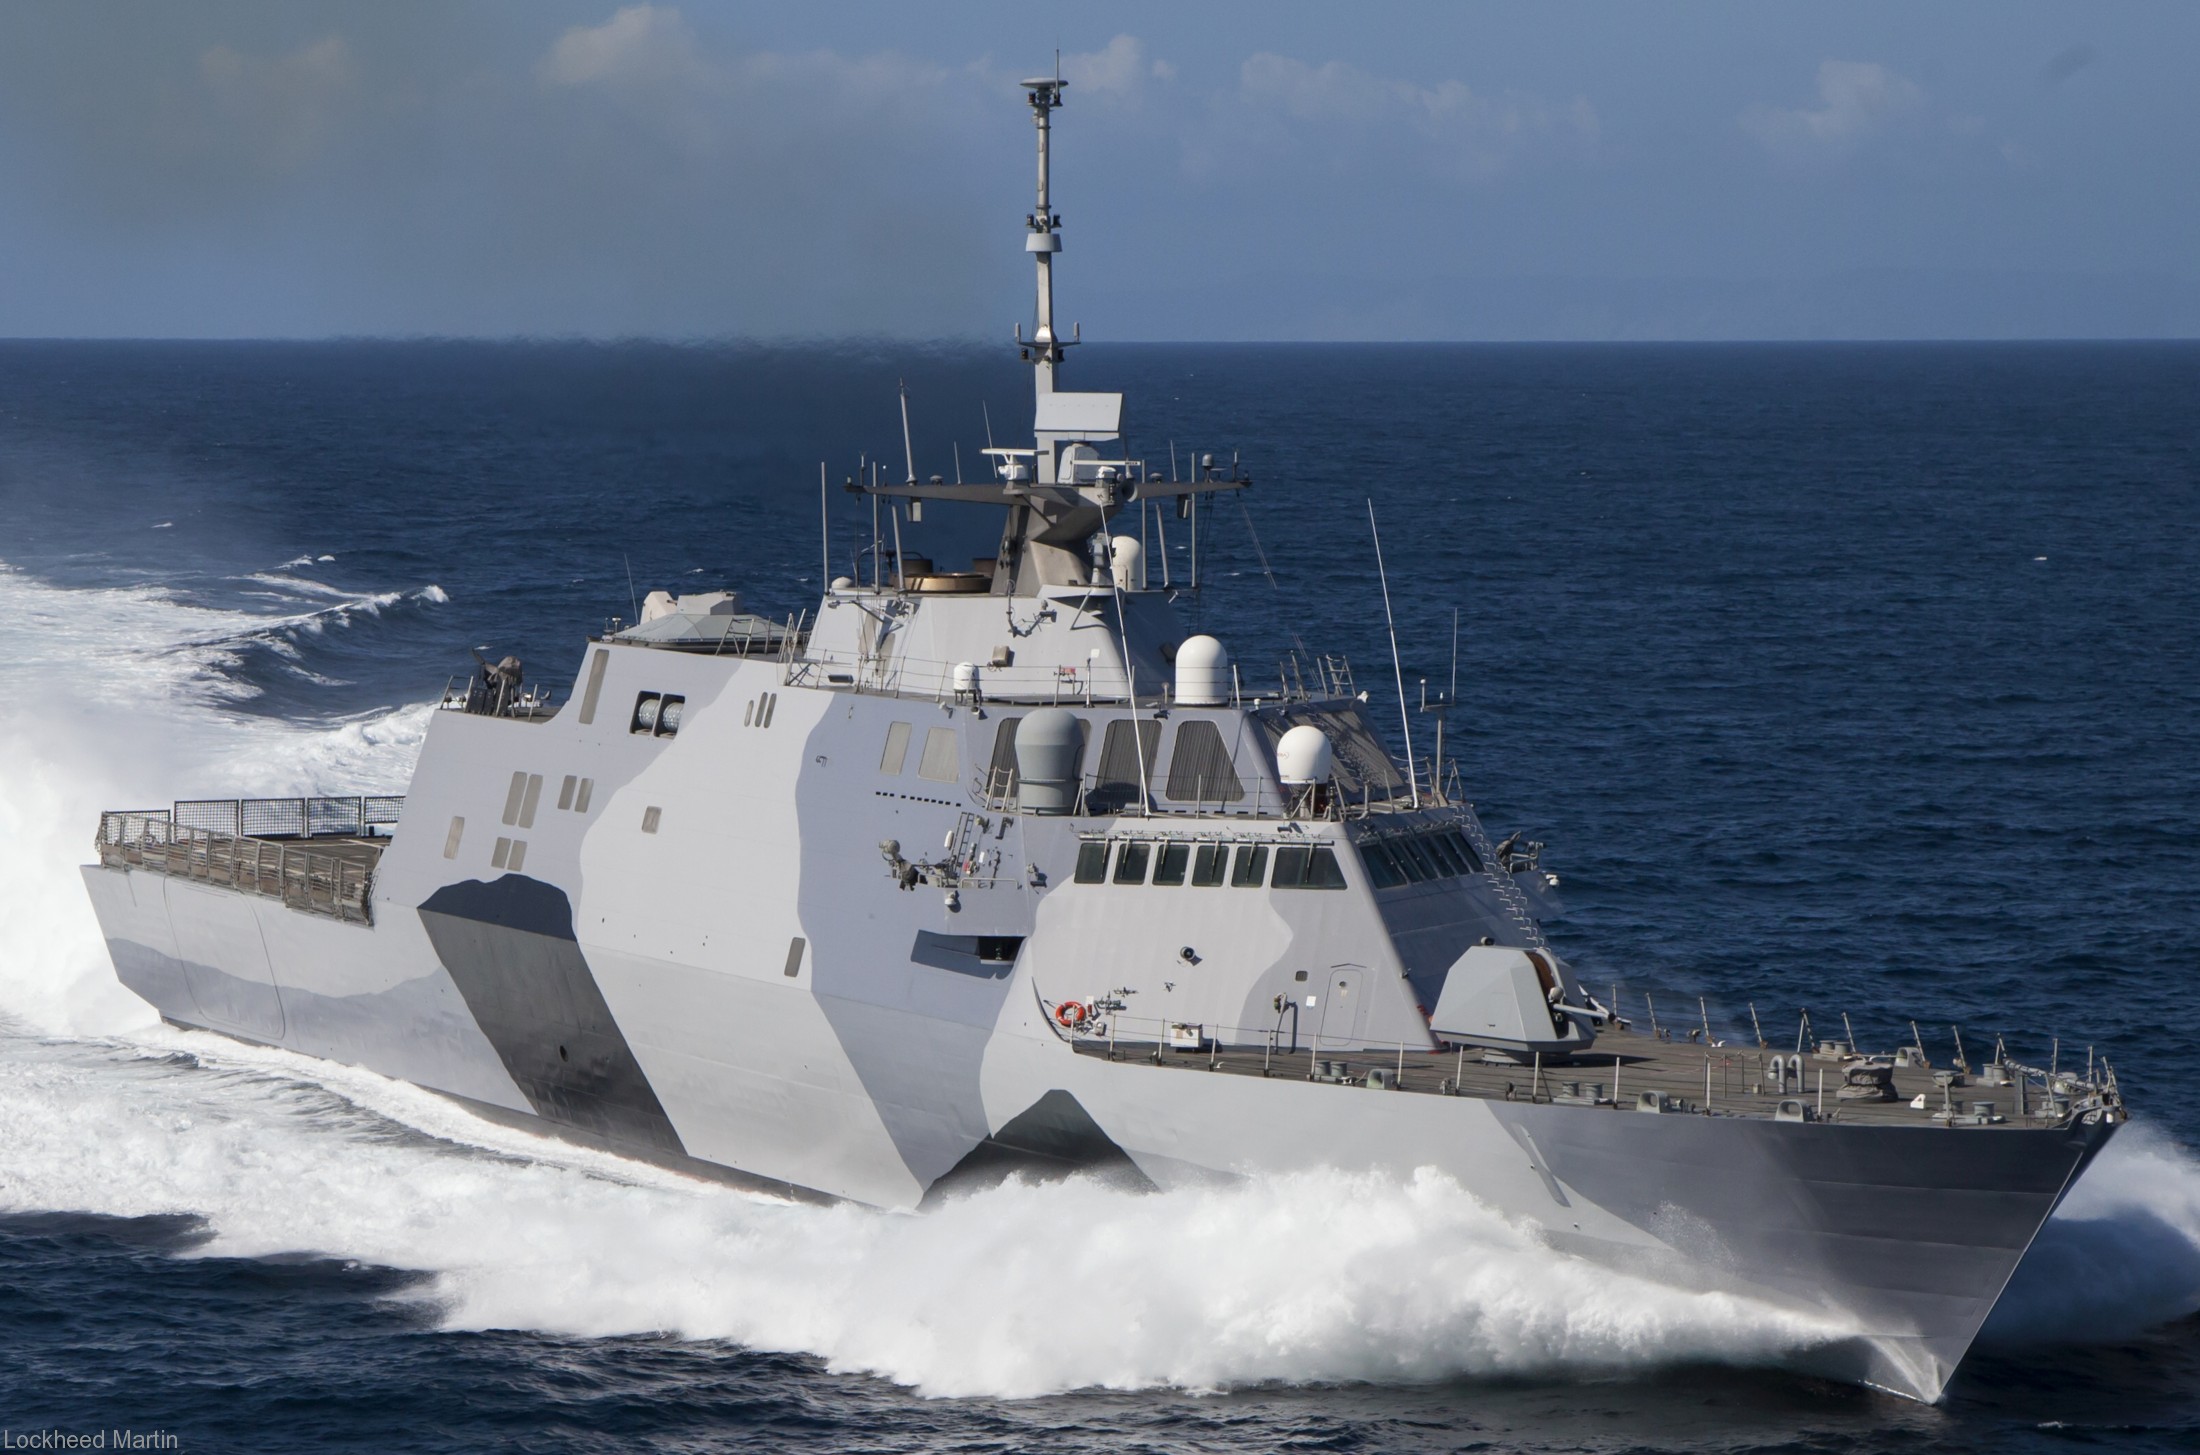 lcs-1 uss freedom class littoral combat ship us navy 159